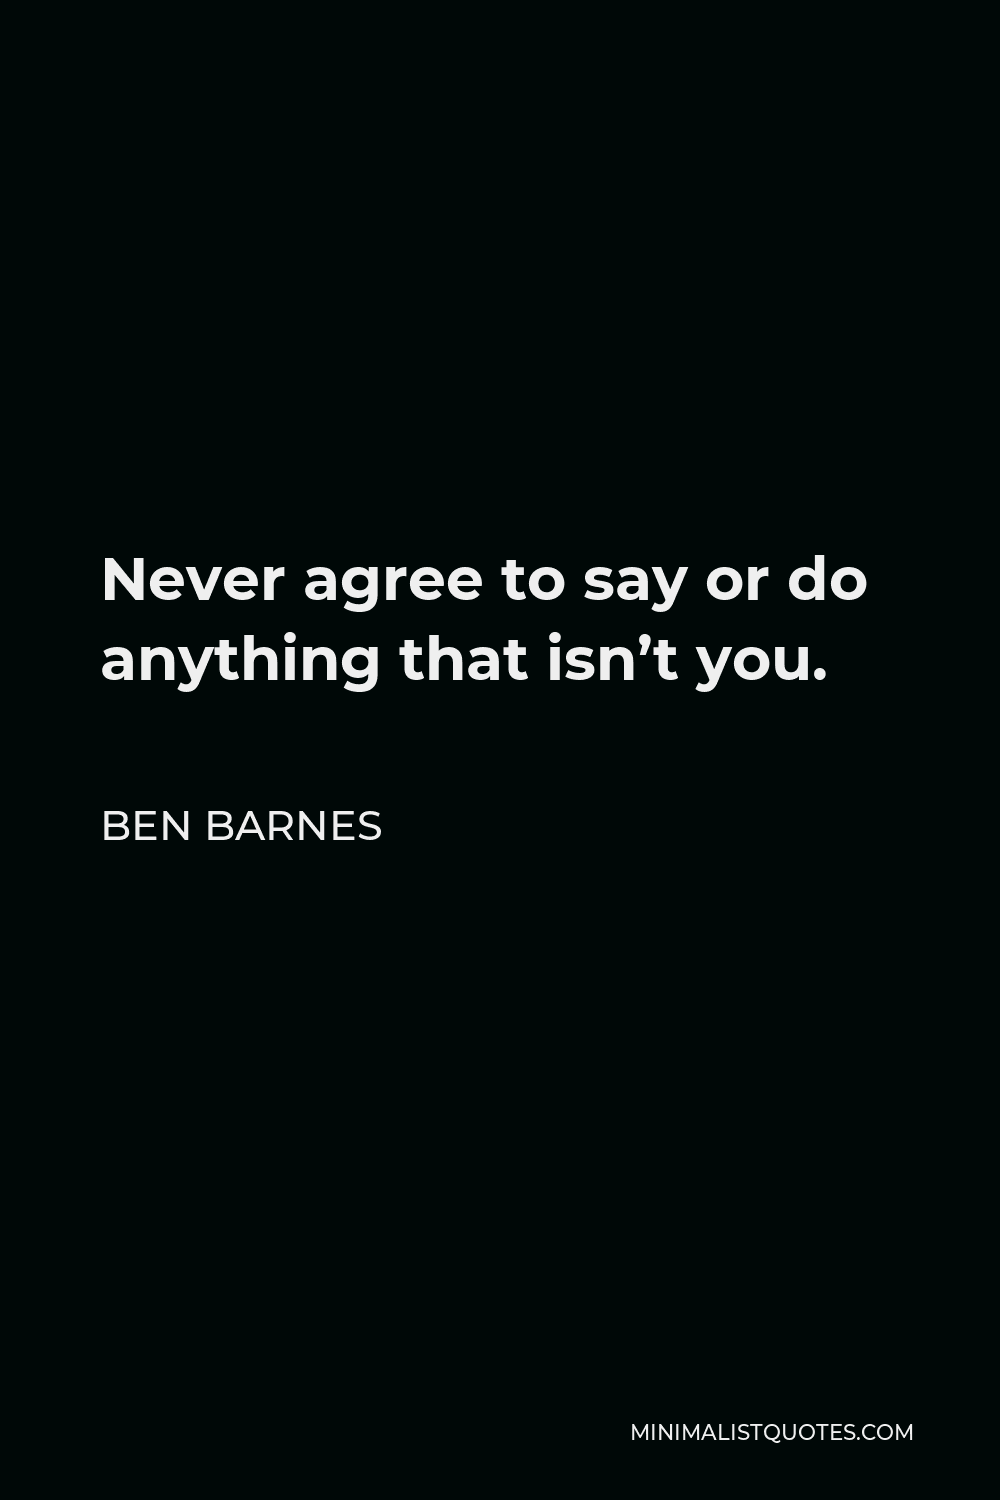 Ben Barnes Quote - Never agree to say or do anything that isn’t you.